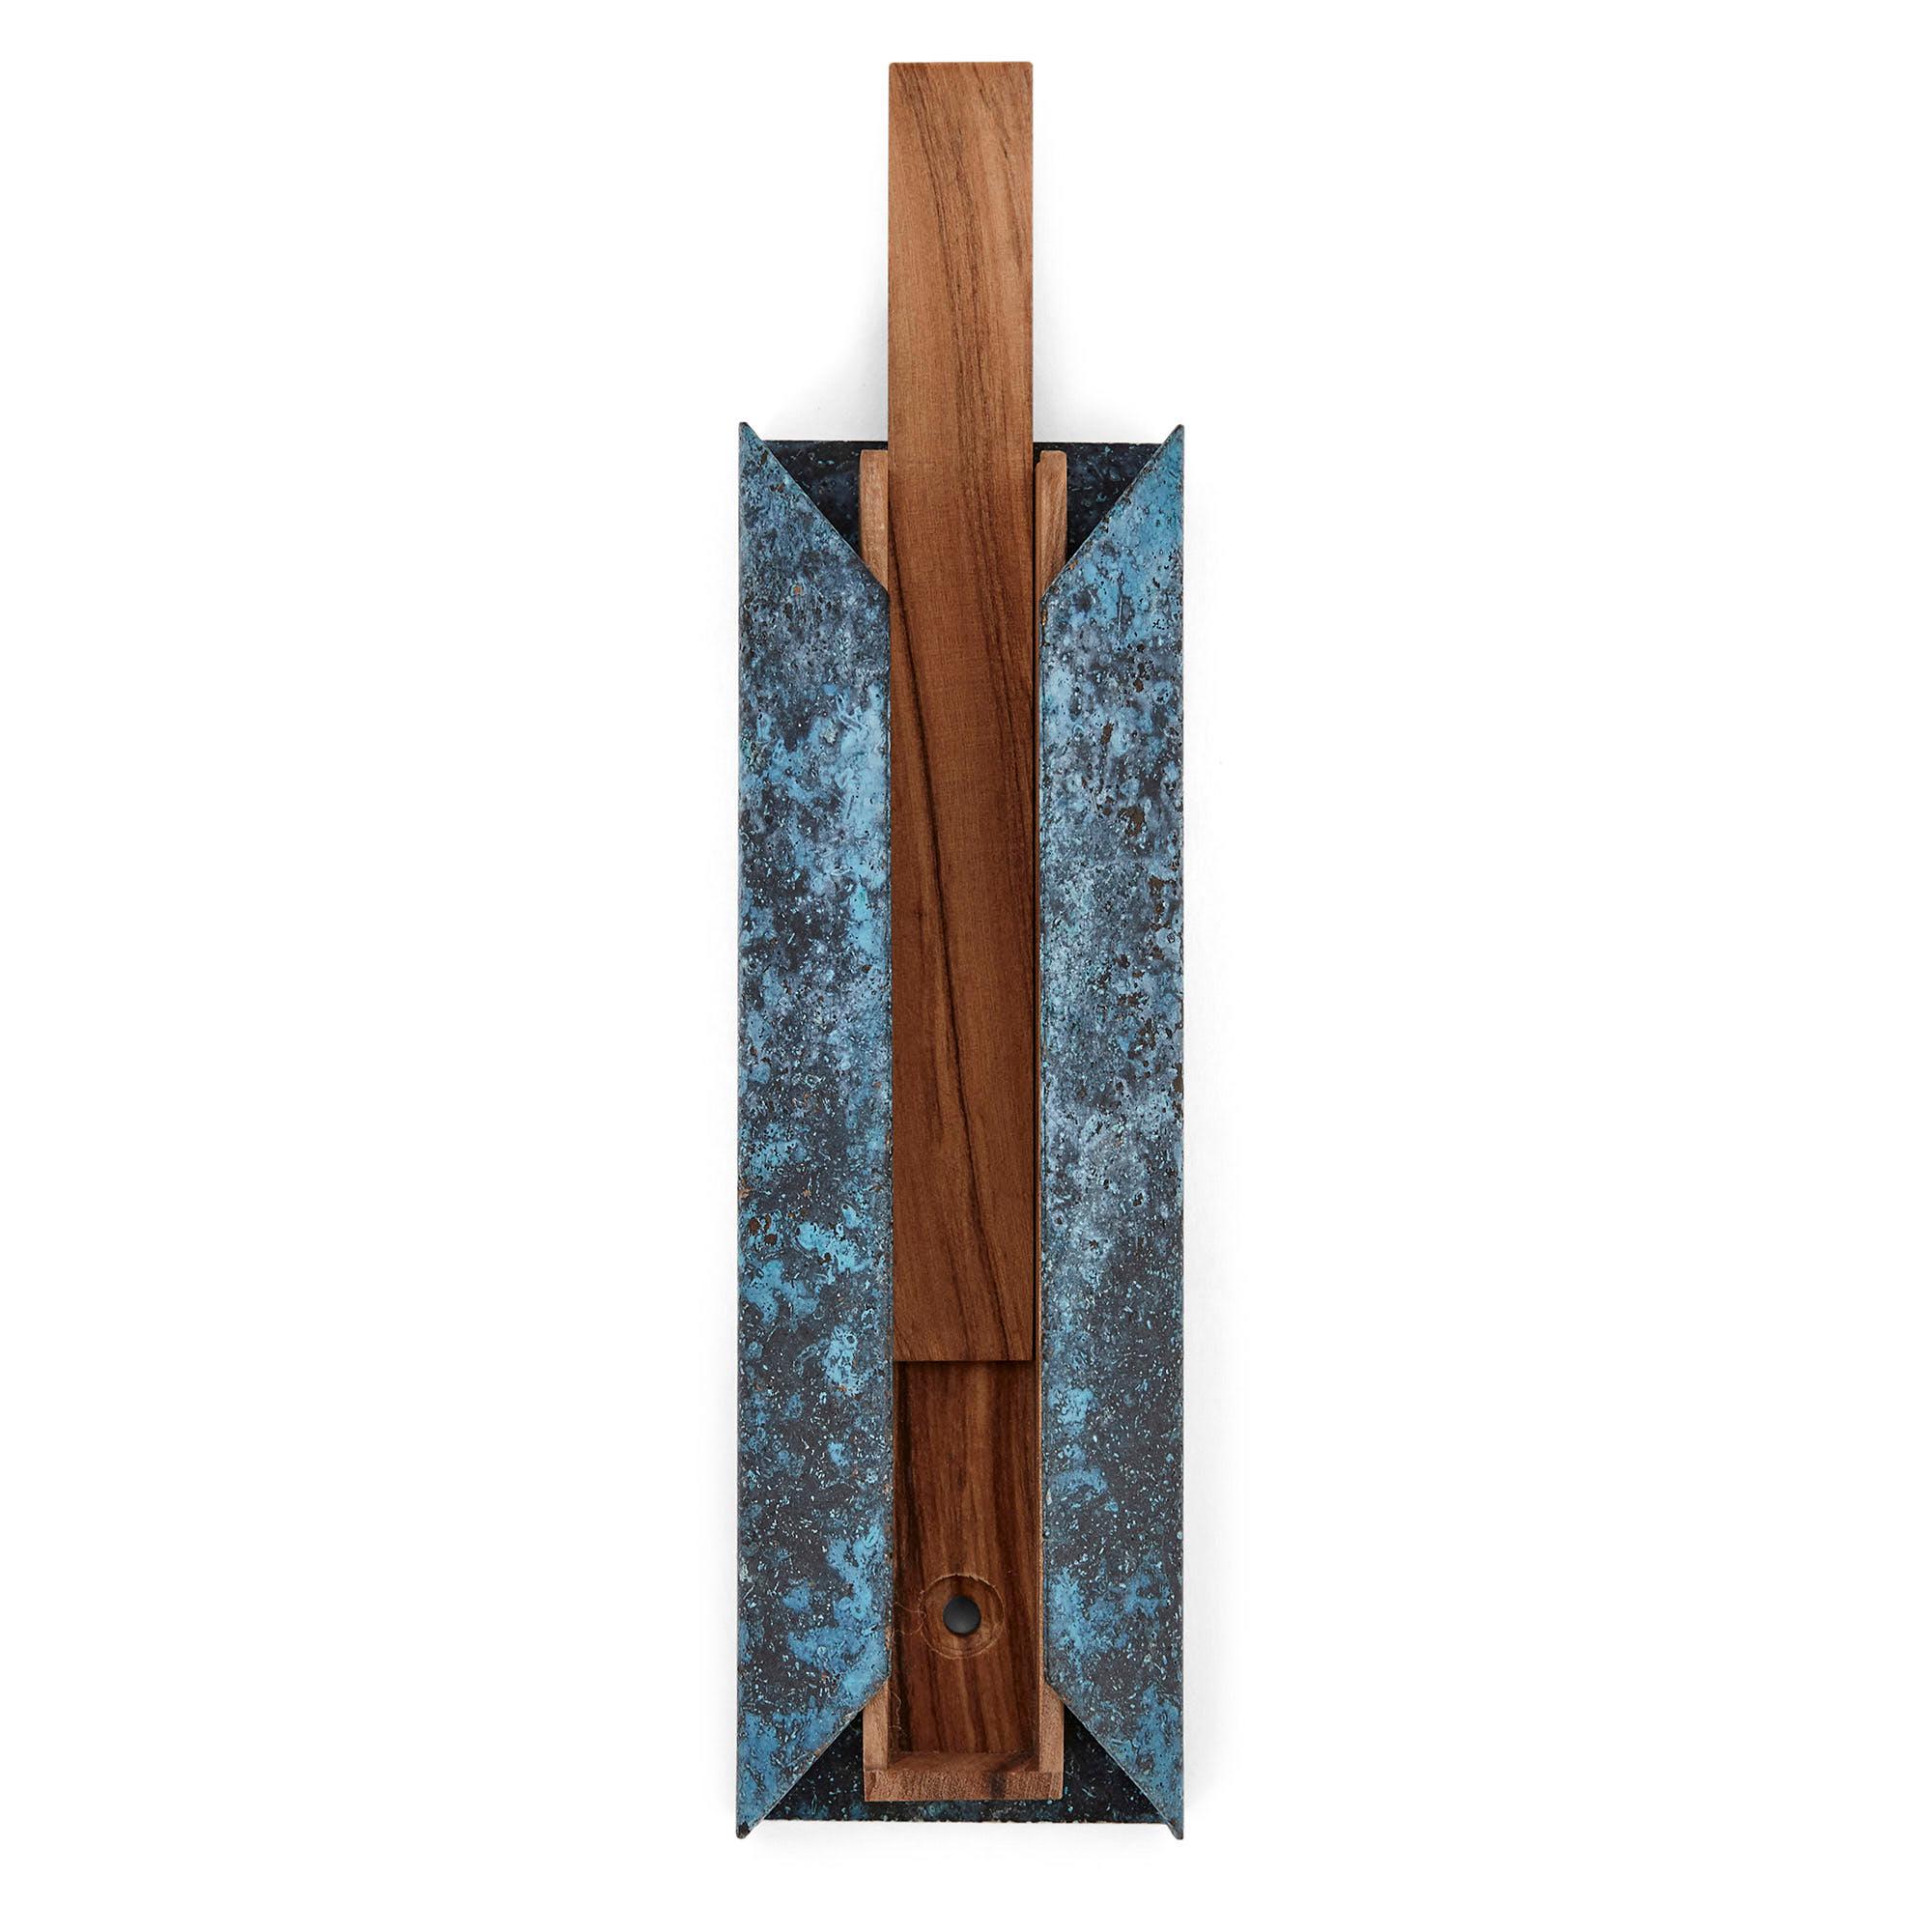 This elegant and sculptural mezuzah in sterling silver, olive wood and copper is inspired by what a home represents. Named ‘House’ mezuzah by the artist, the form voices protection. The highly polished sterling silver cylinder made to contain the